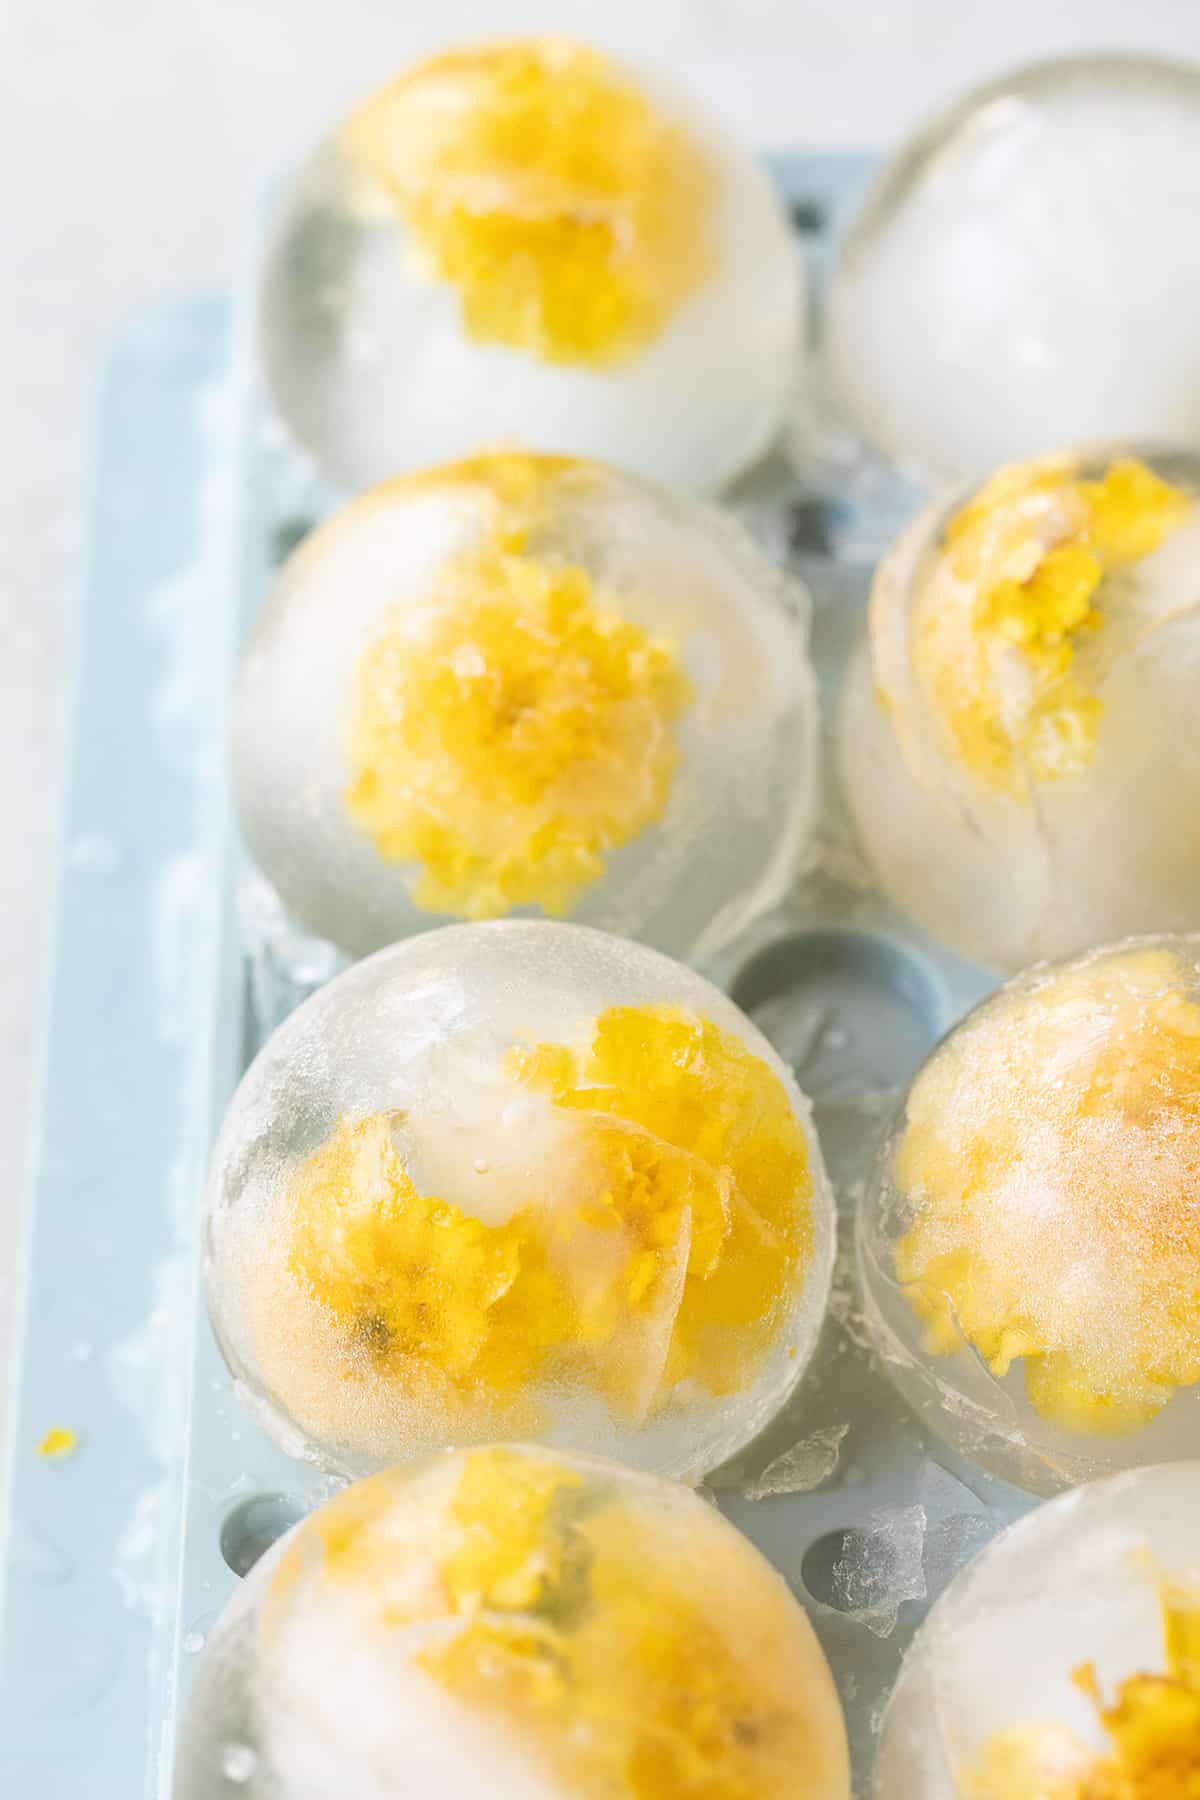 Round flower ice cubes with yellow edible flowers frozen inside.